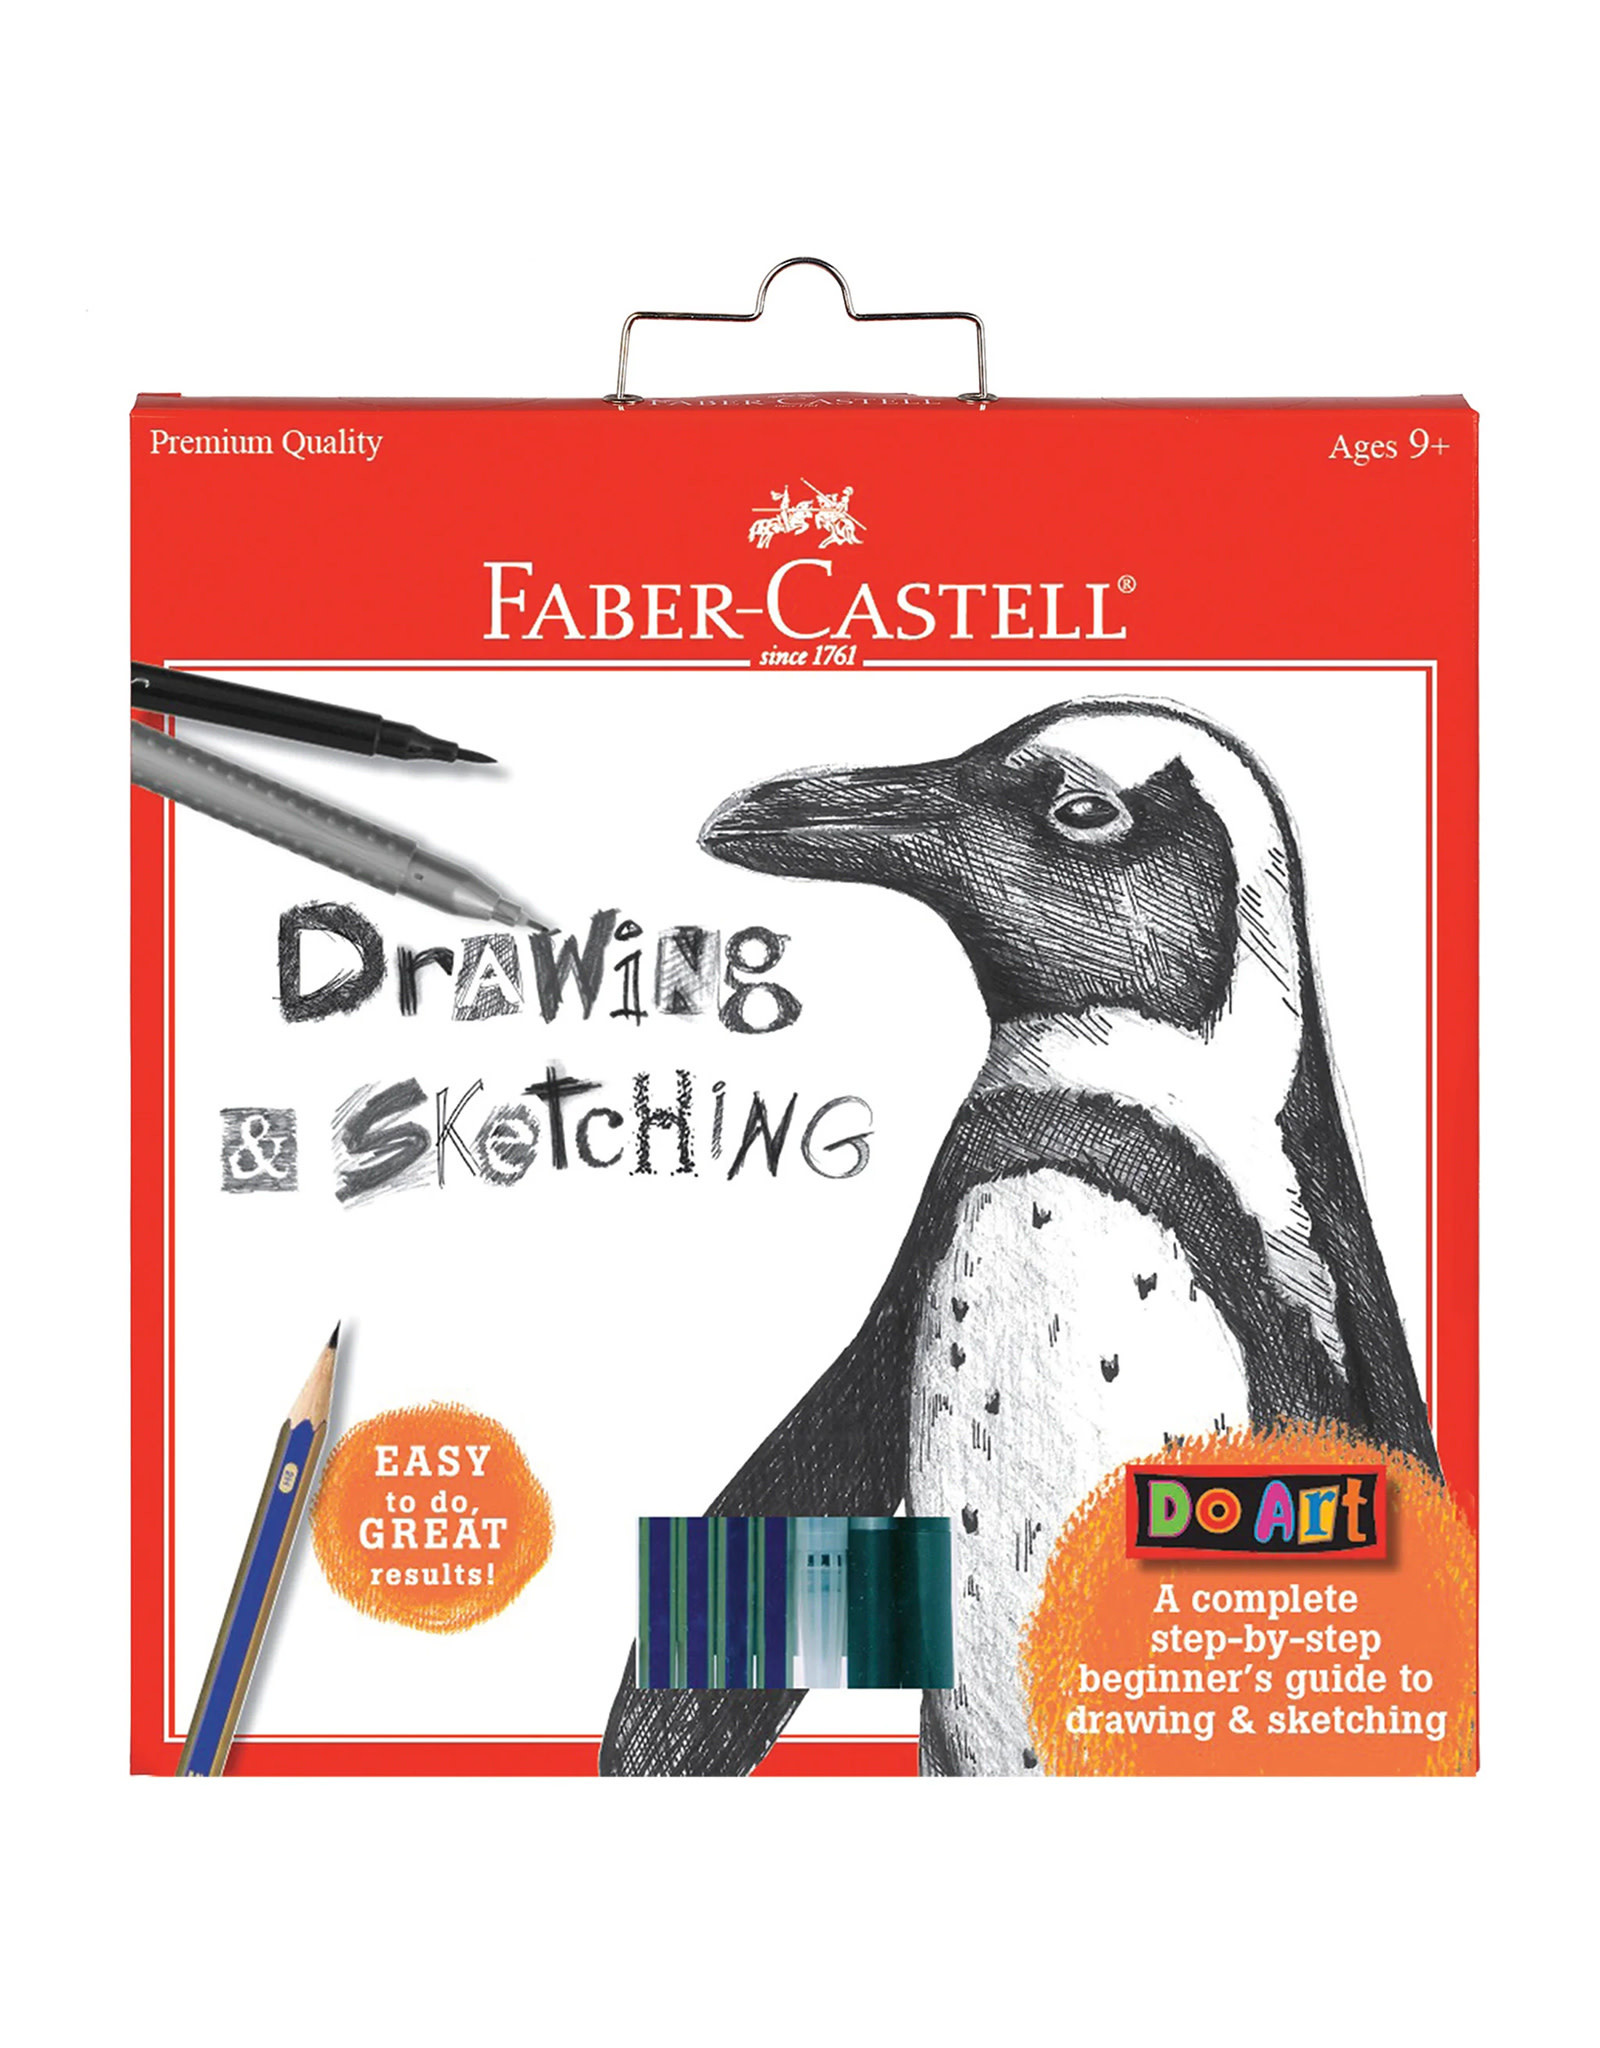 FABER-CASTELL Faber-Castell Do Art Drawing & Sketching